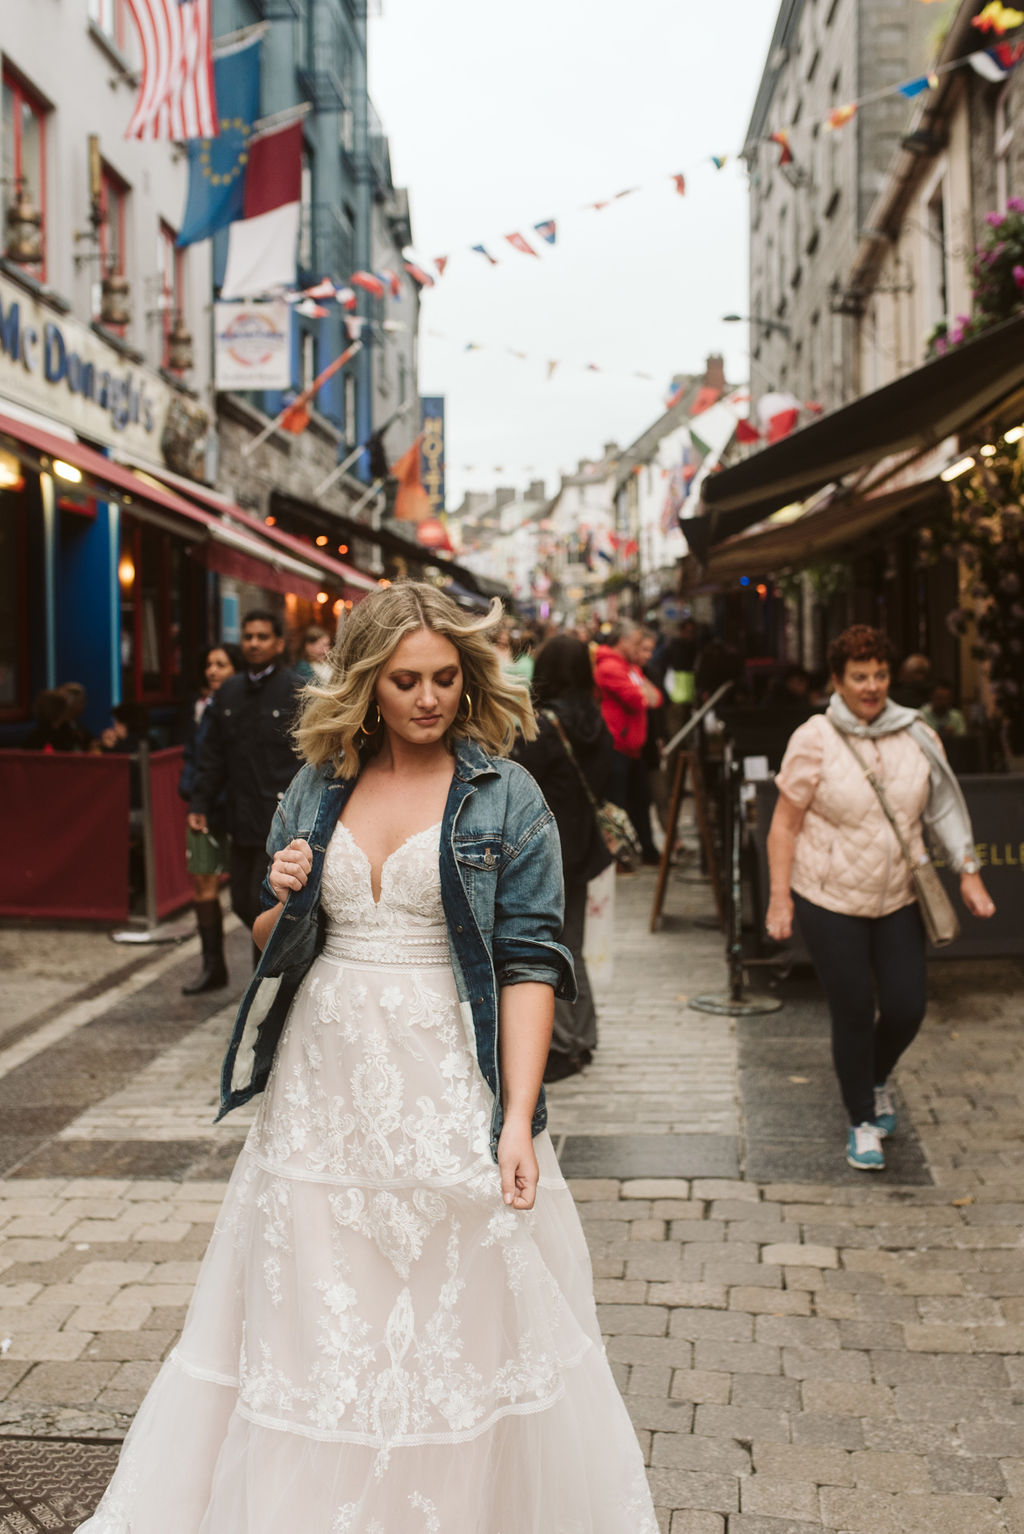 Bride wears a jean jacket and a lace boho wedding dress in the streets of Galway Ireland with people walking by